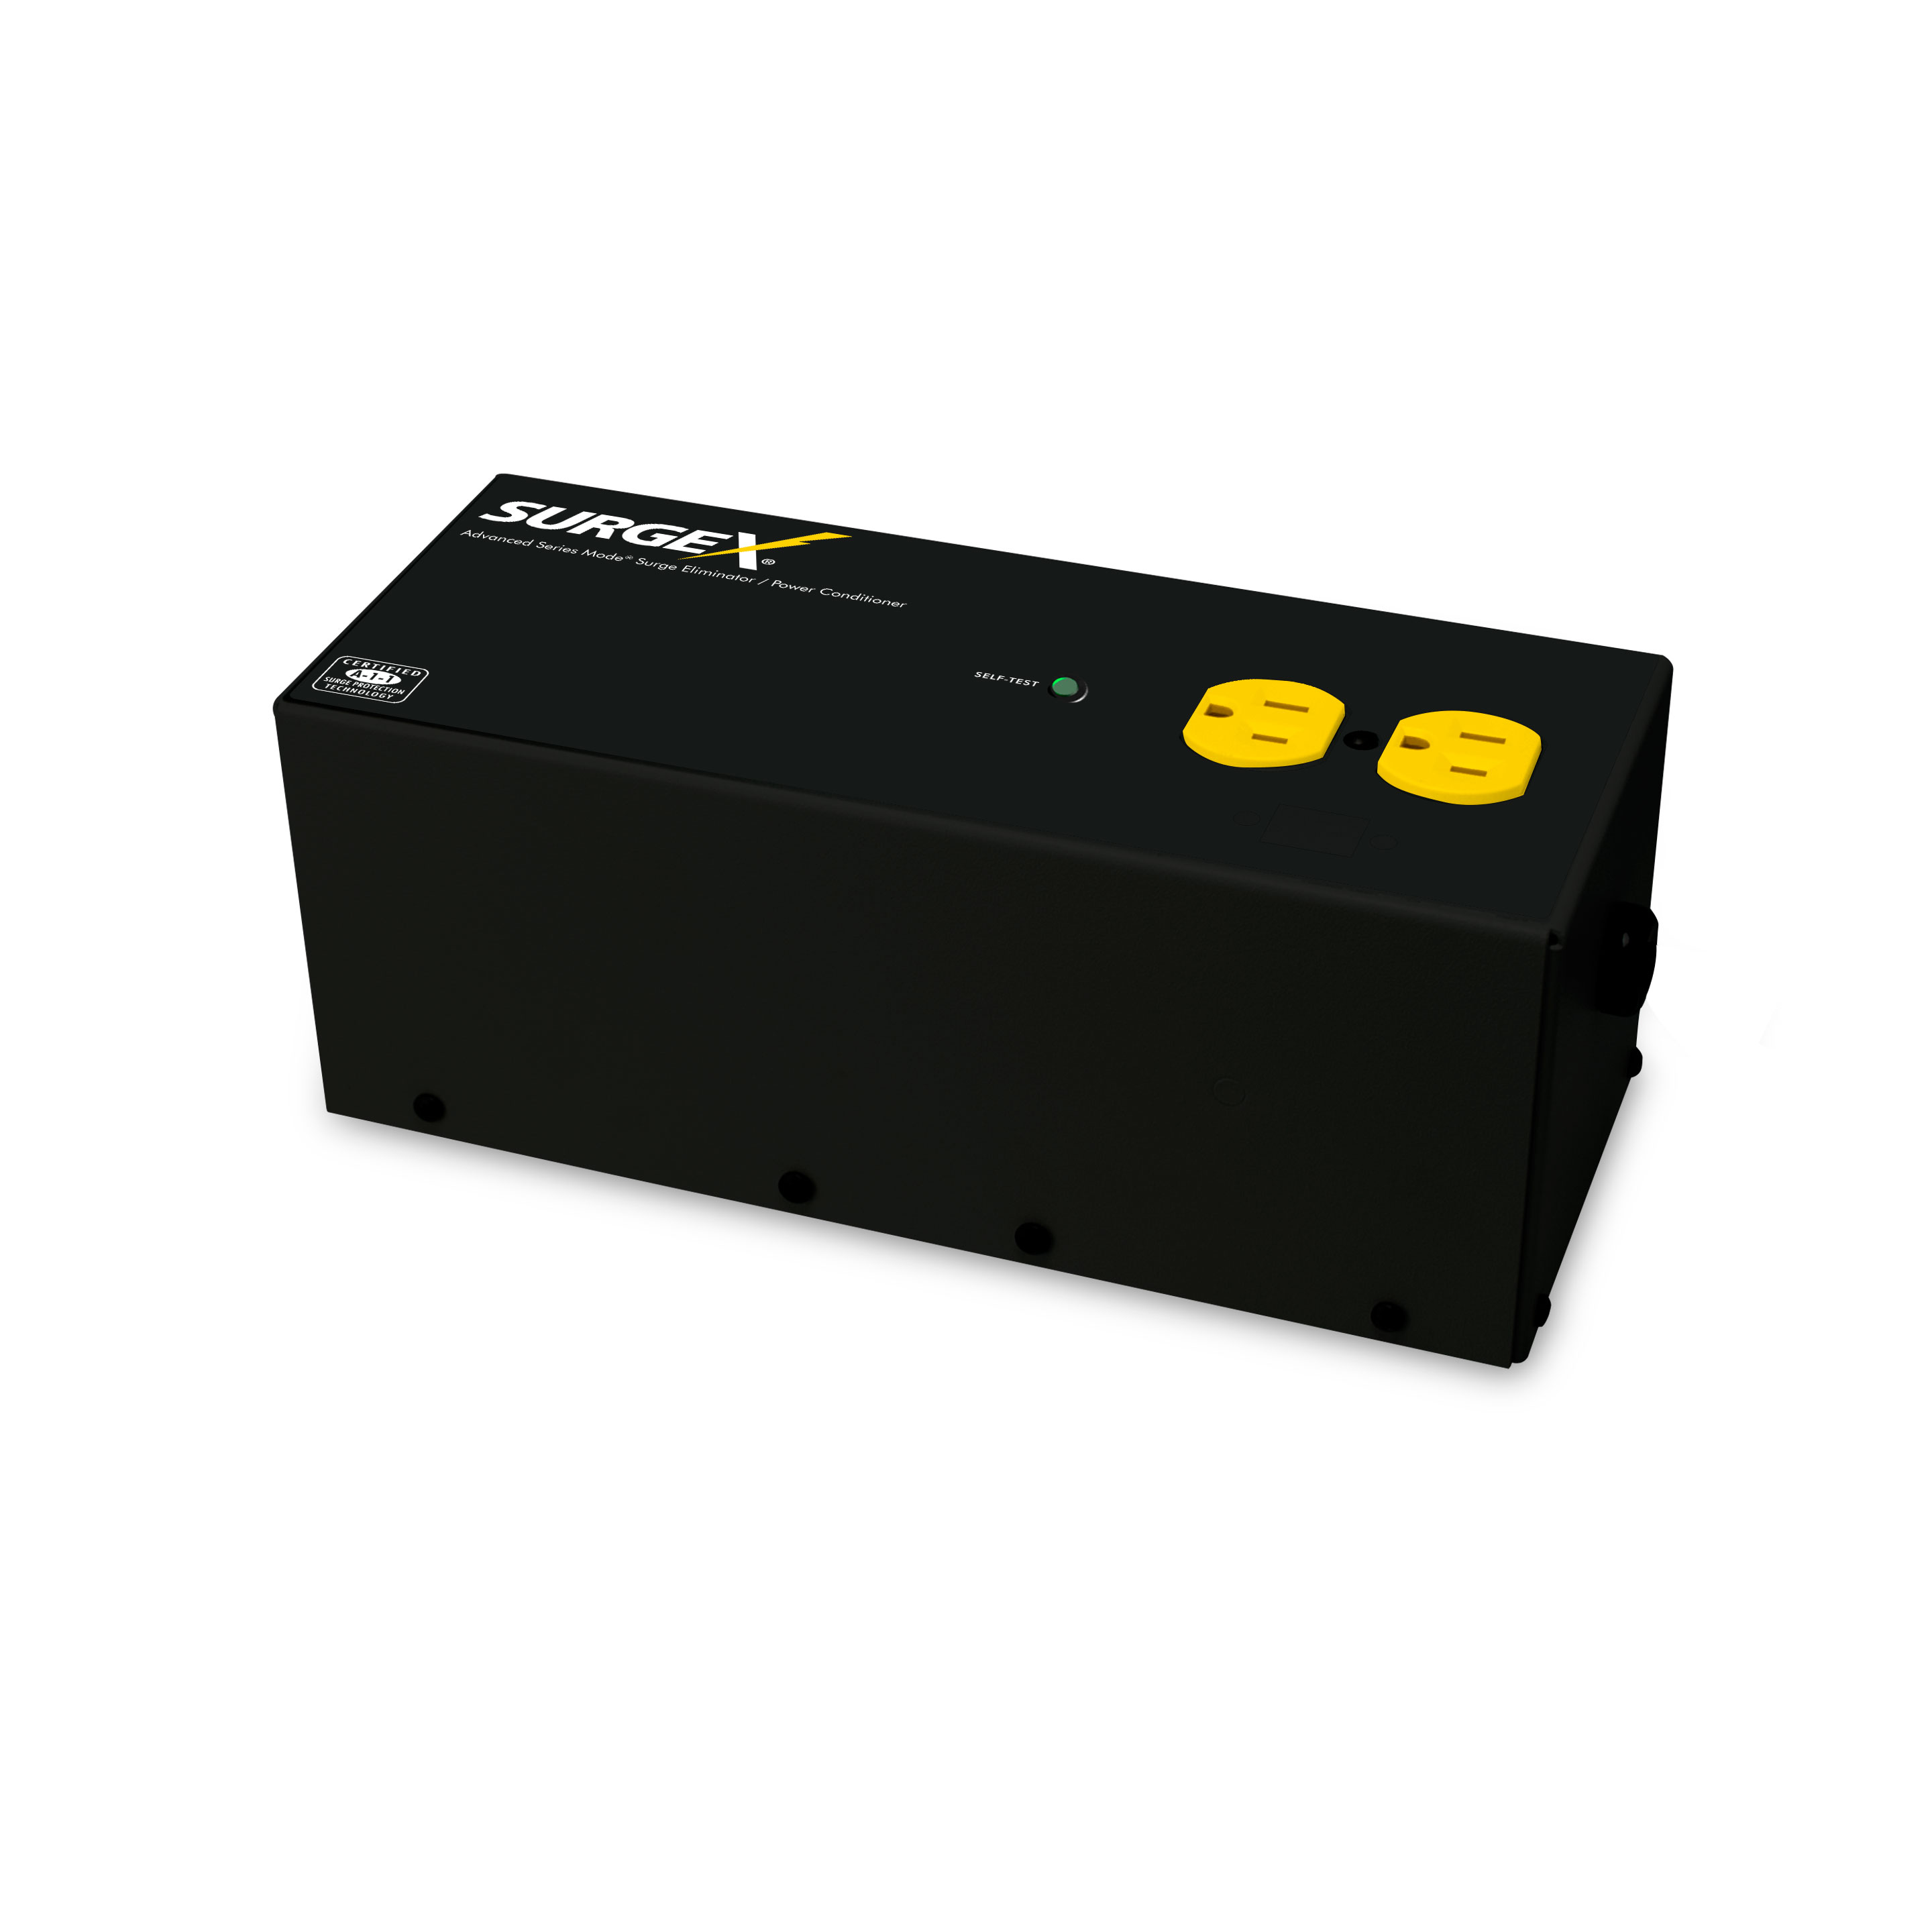 SA-15 Standalone Surge Eliminator and Power Conditioner